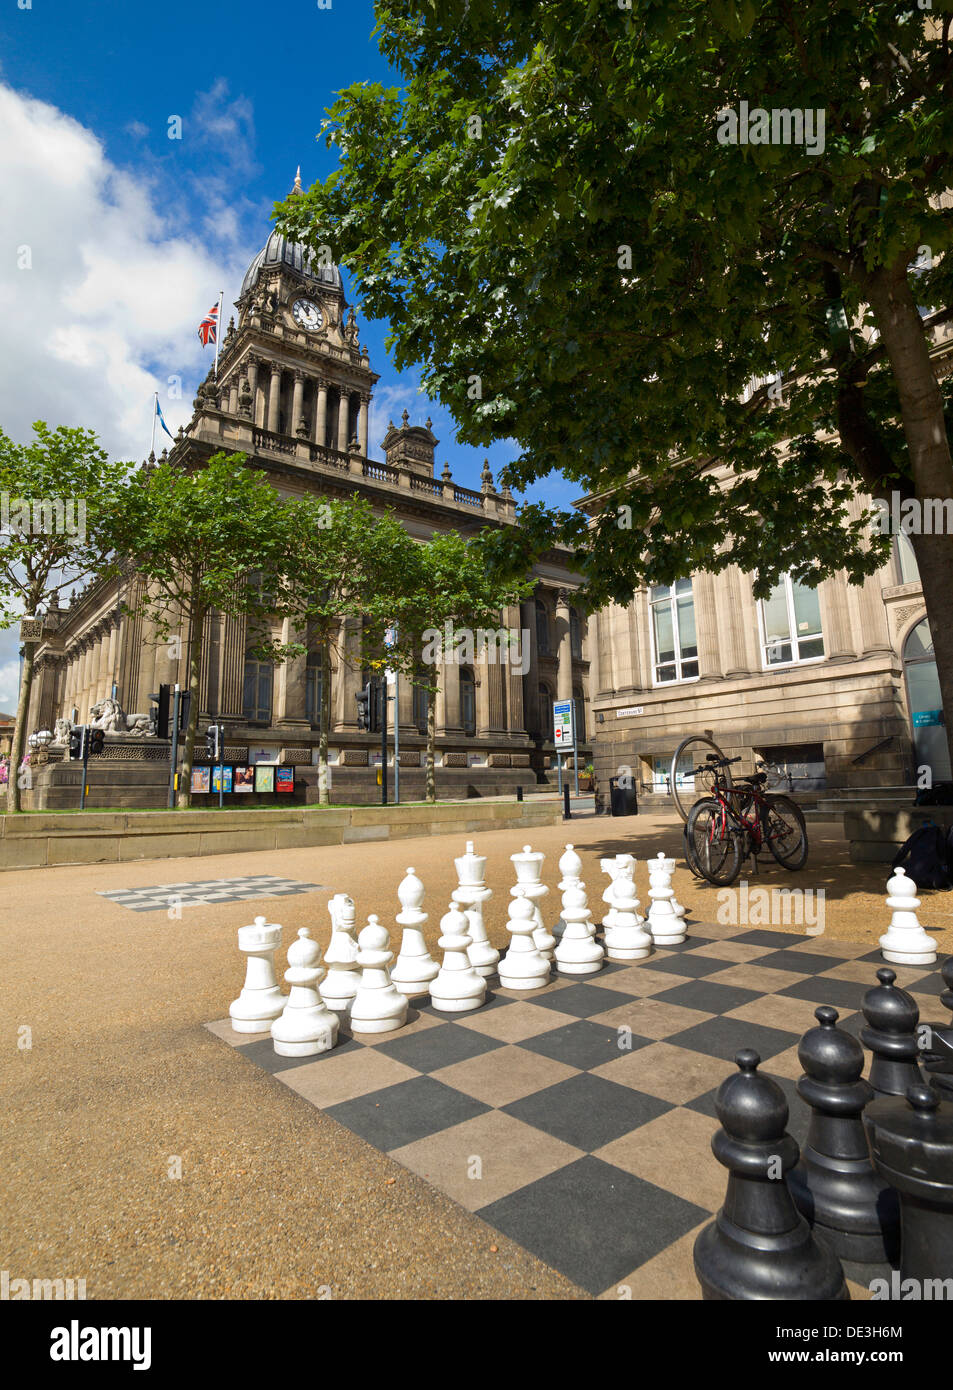 street chess pieces and board by leeds town hall built in 1858 designed by cuthbert brodrick leeds yorkshire united kingdom Stock Photo